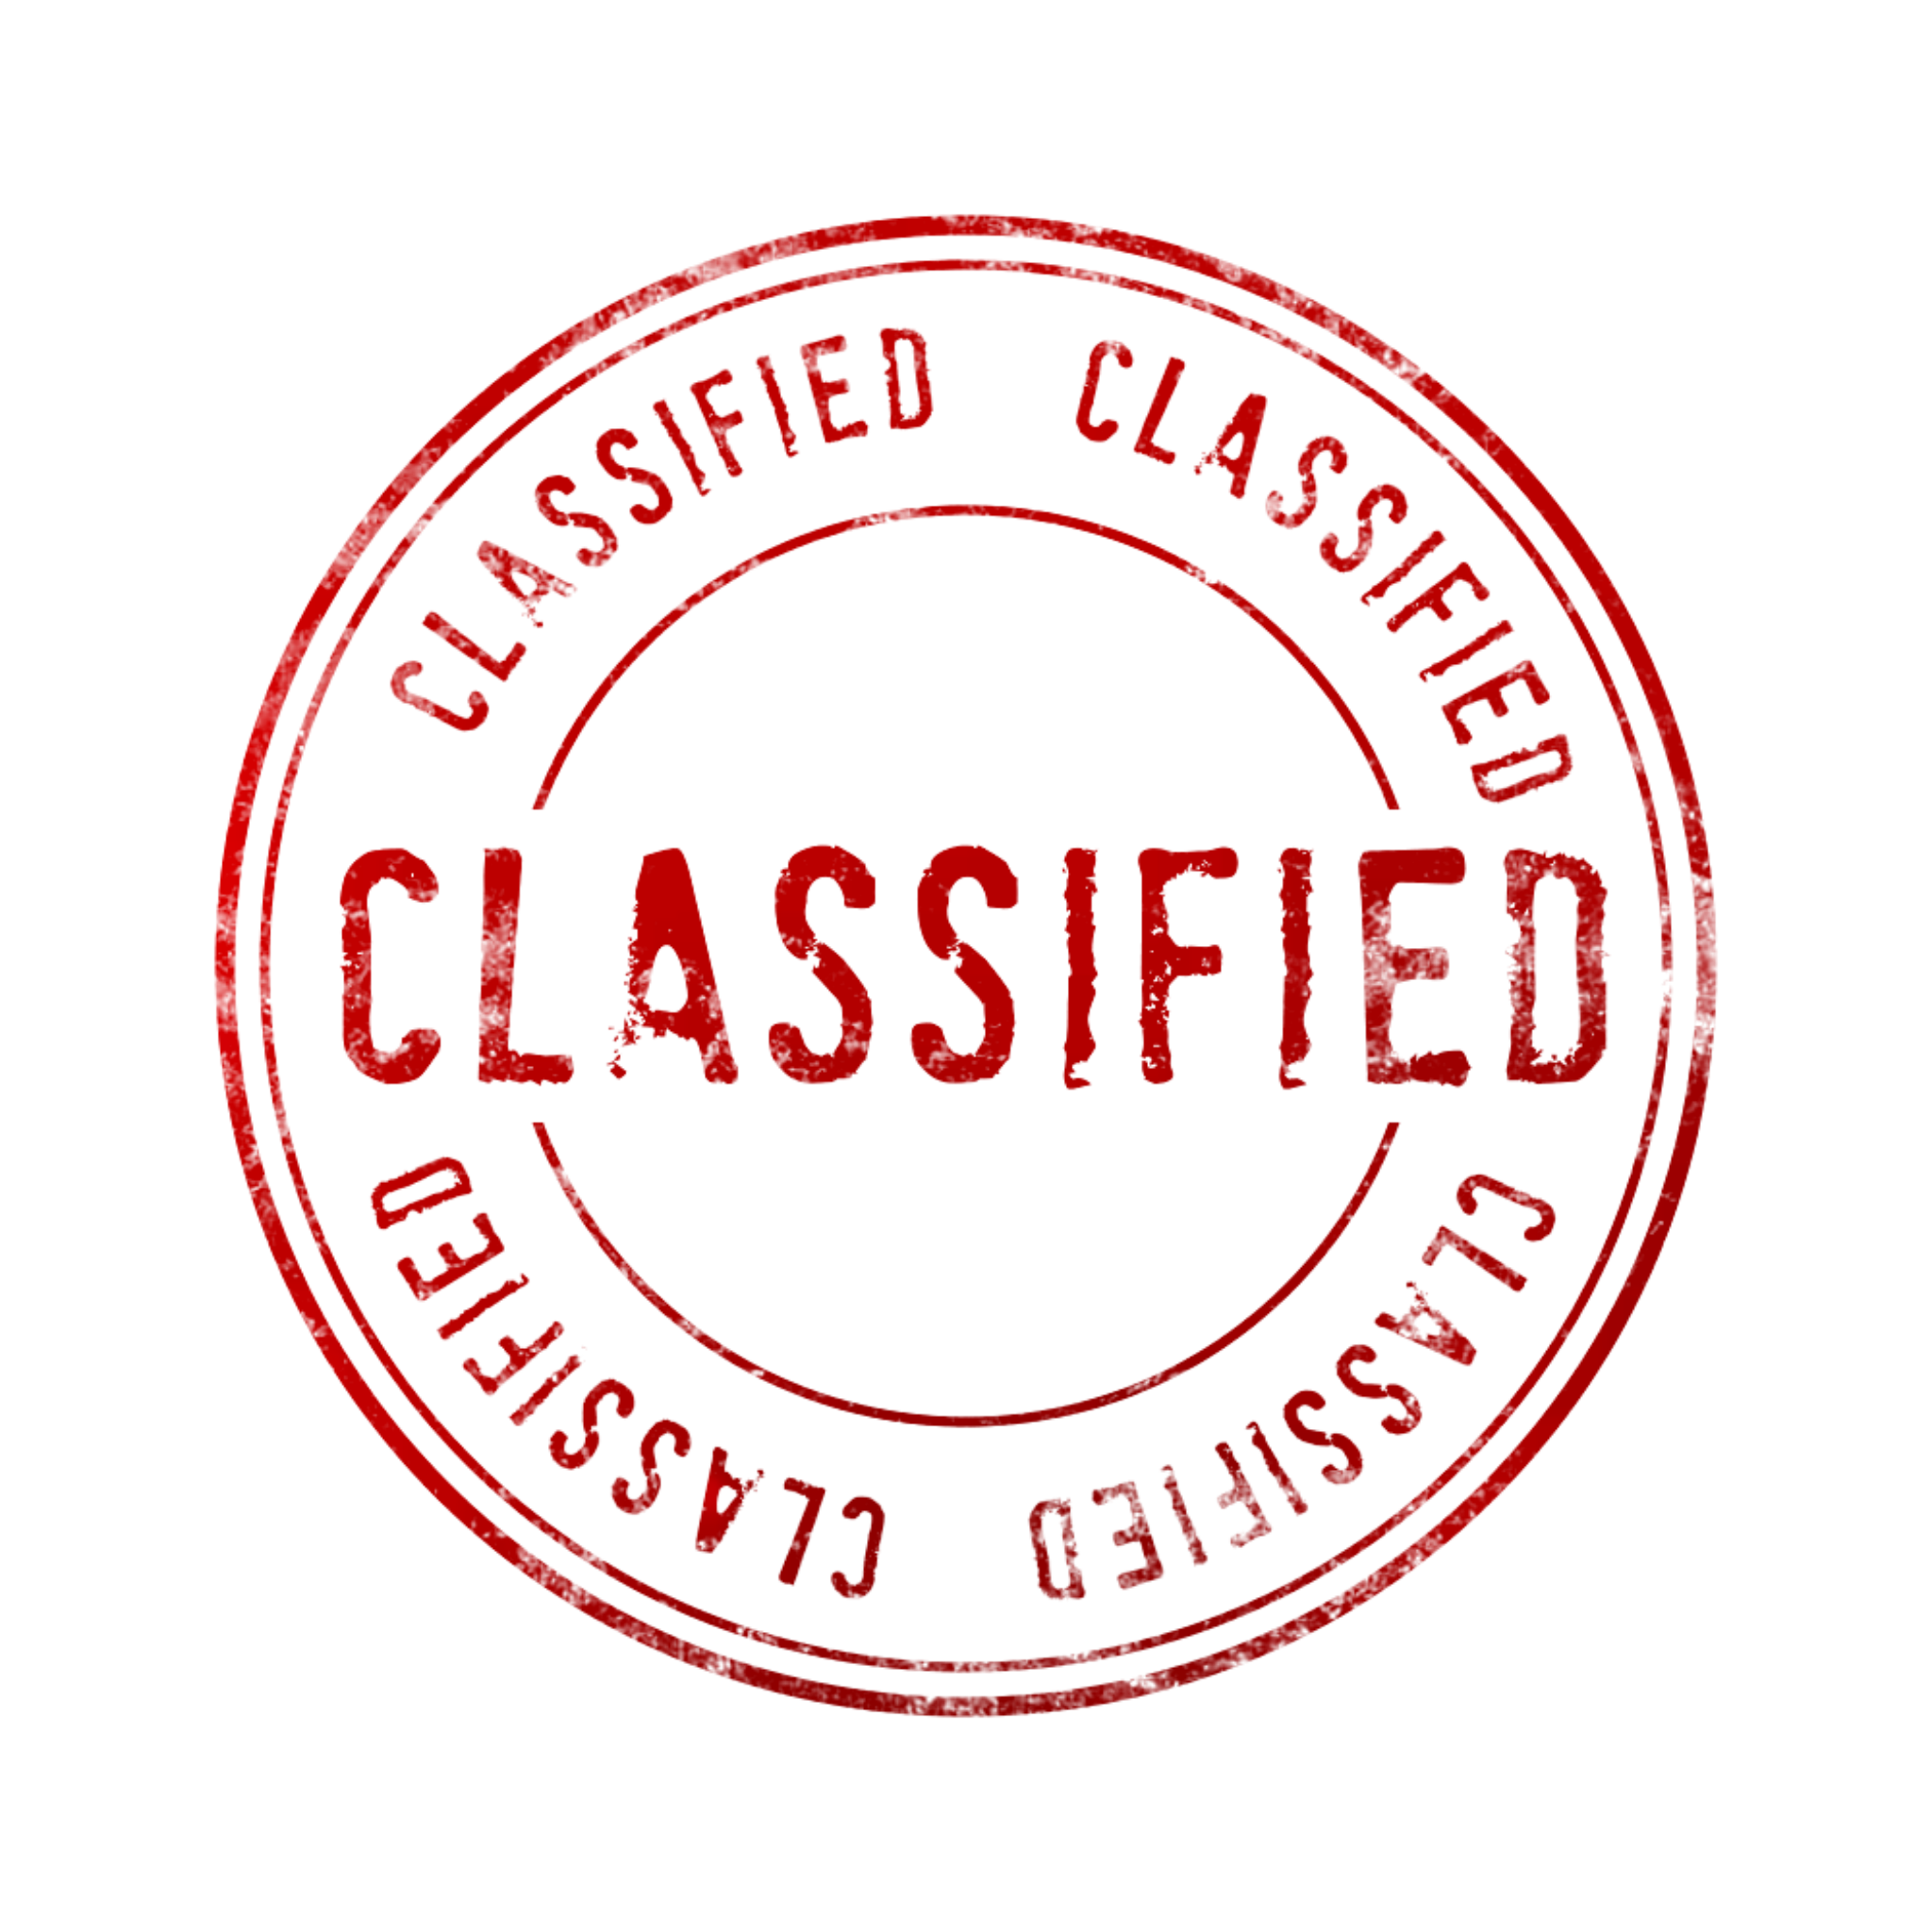 Classified Stamp PNG Image in Transparent pngteam.com